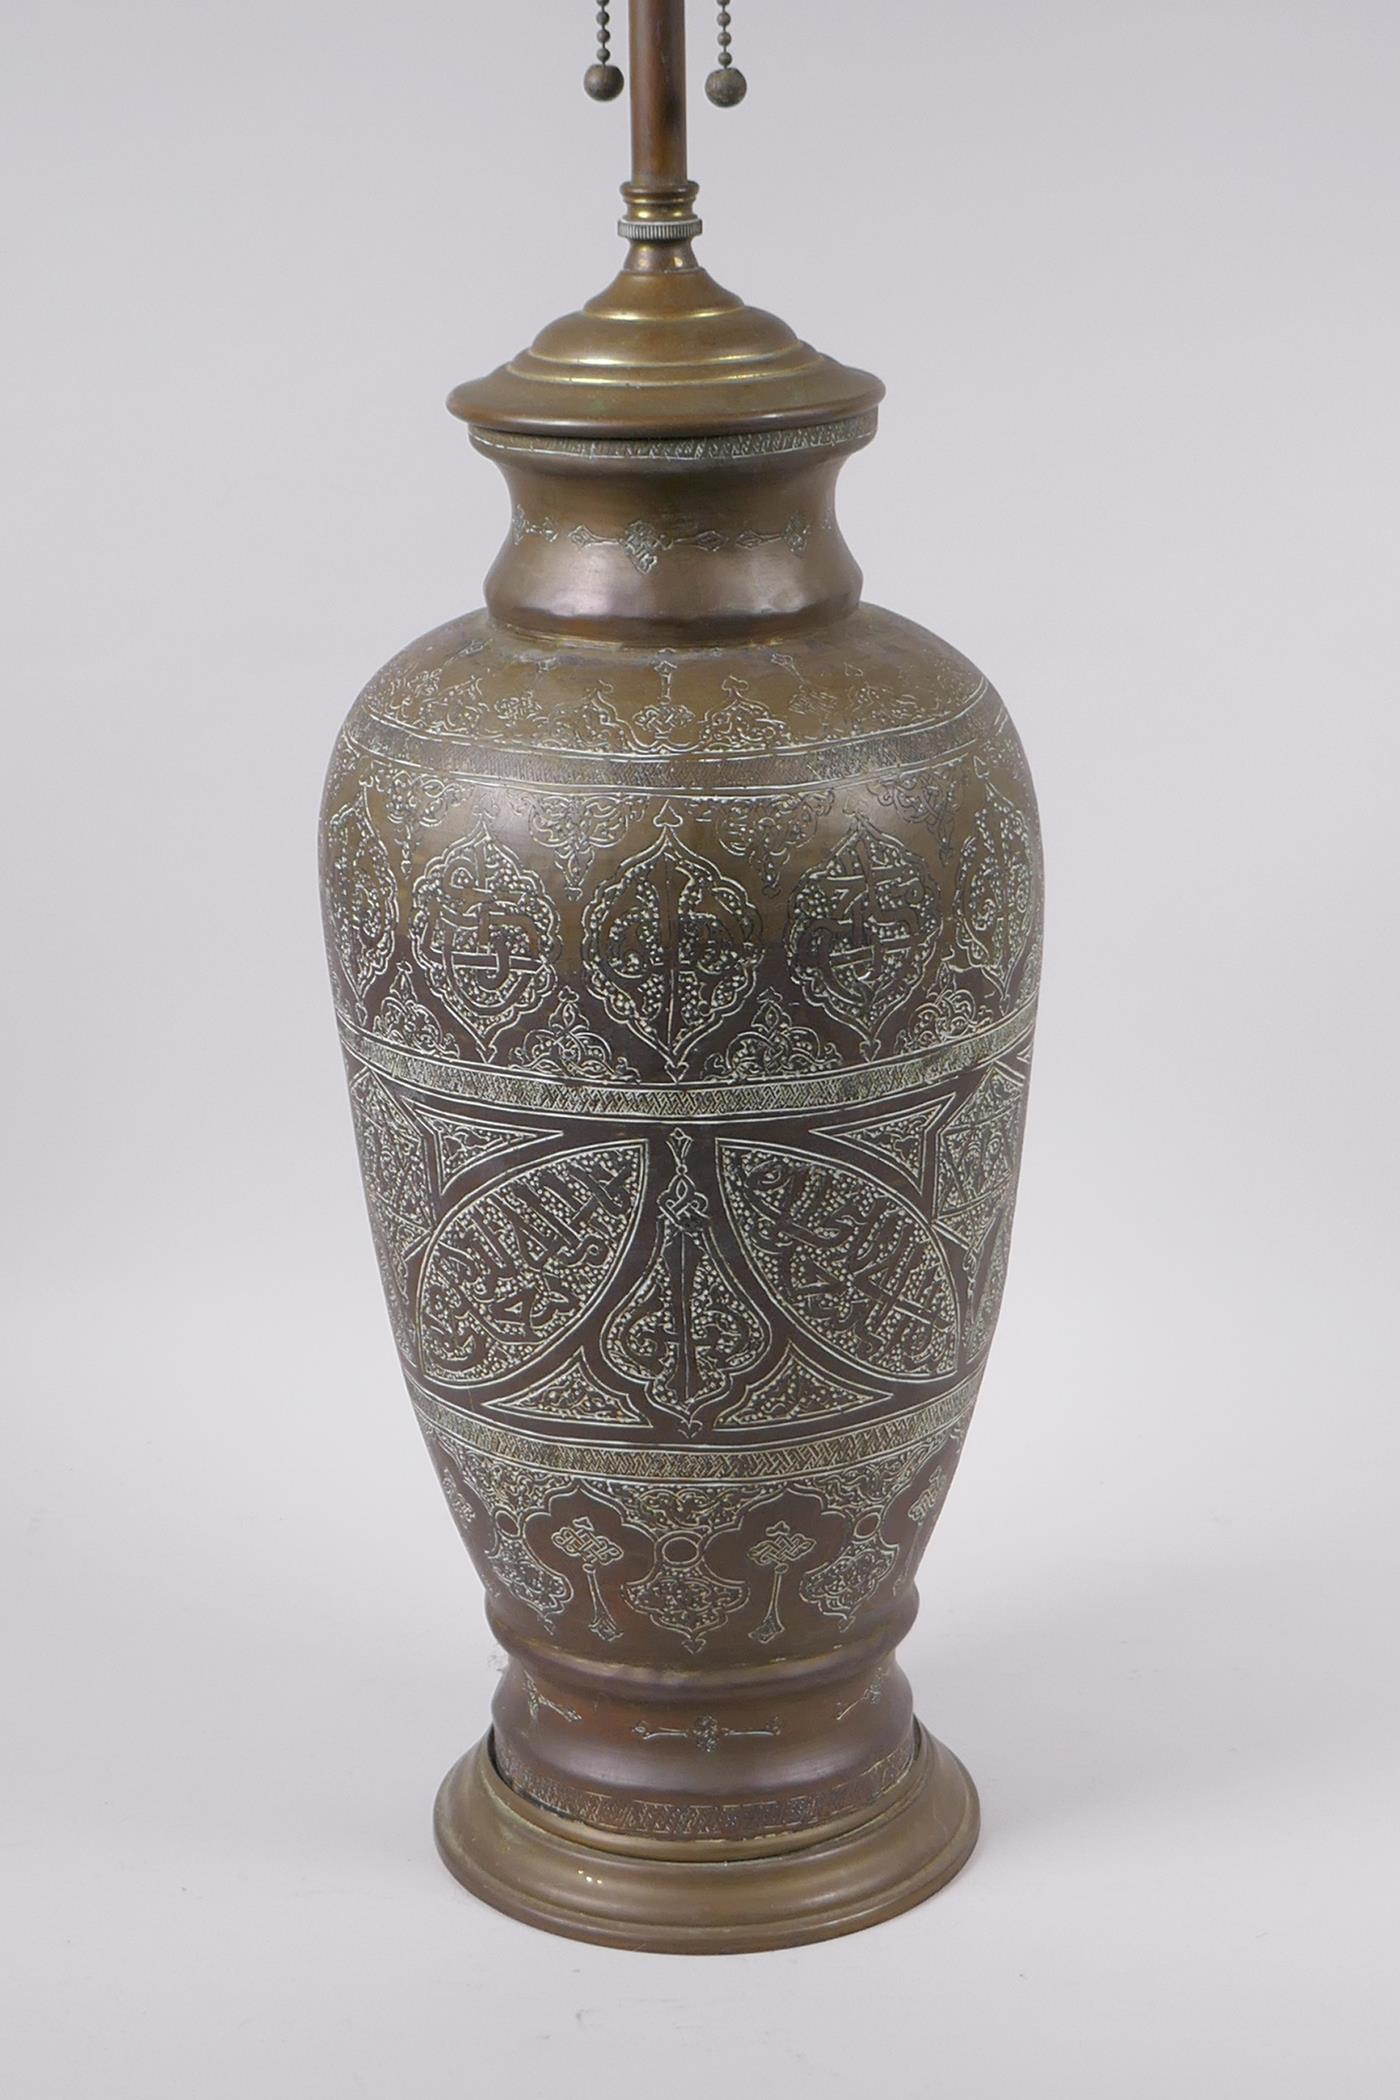 An Islamic brass vase with chased script decoration, converted to a table lamp, 67cm high - Image 4 of 6